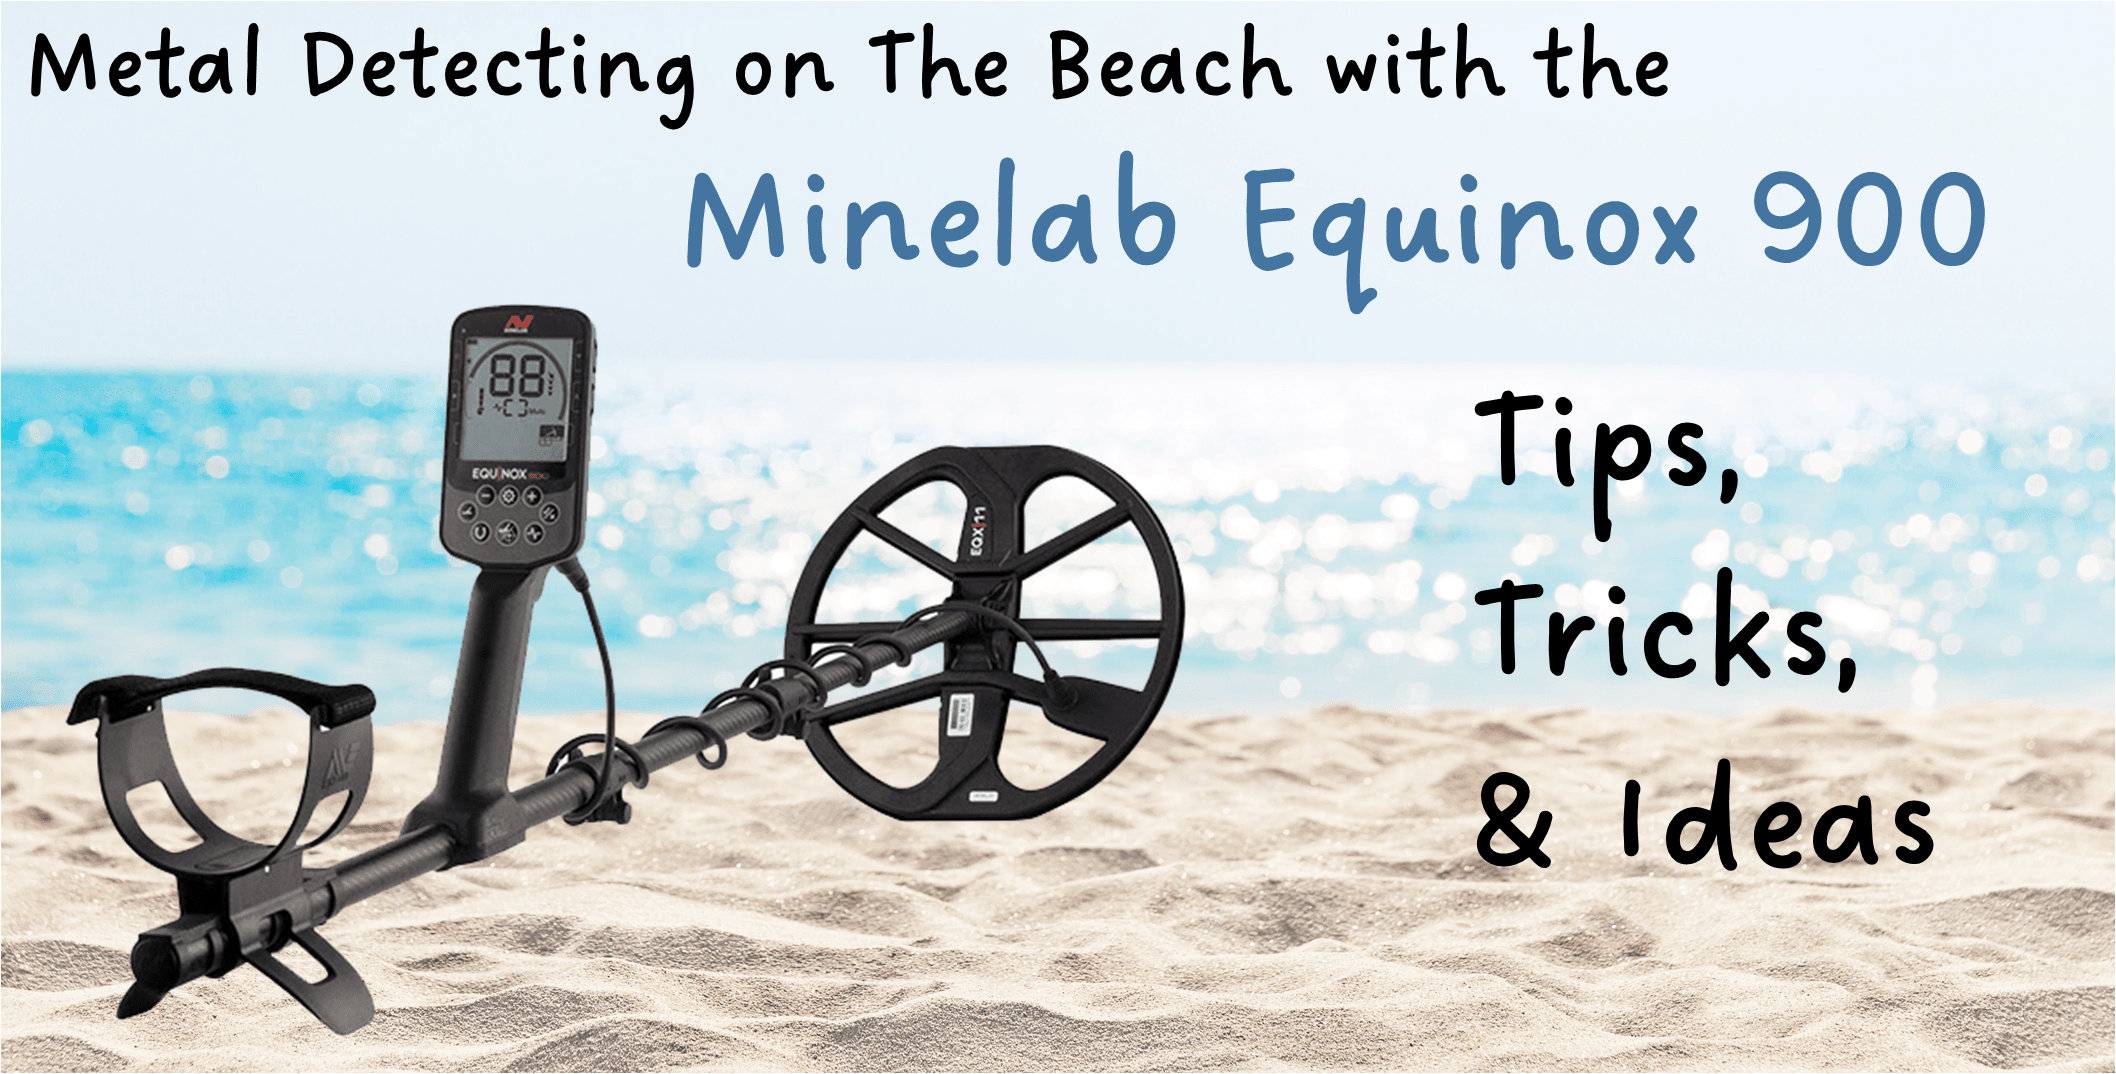 Metal Detecting on The Beach with the Minelab Equinox 900 Metal Detector